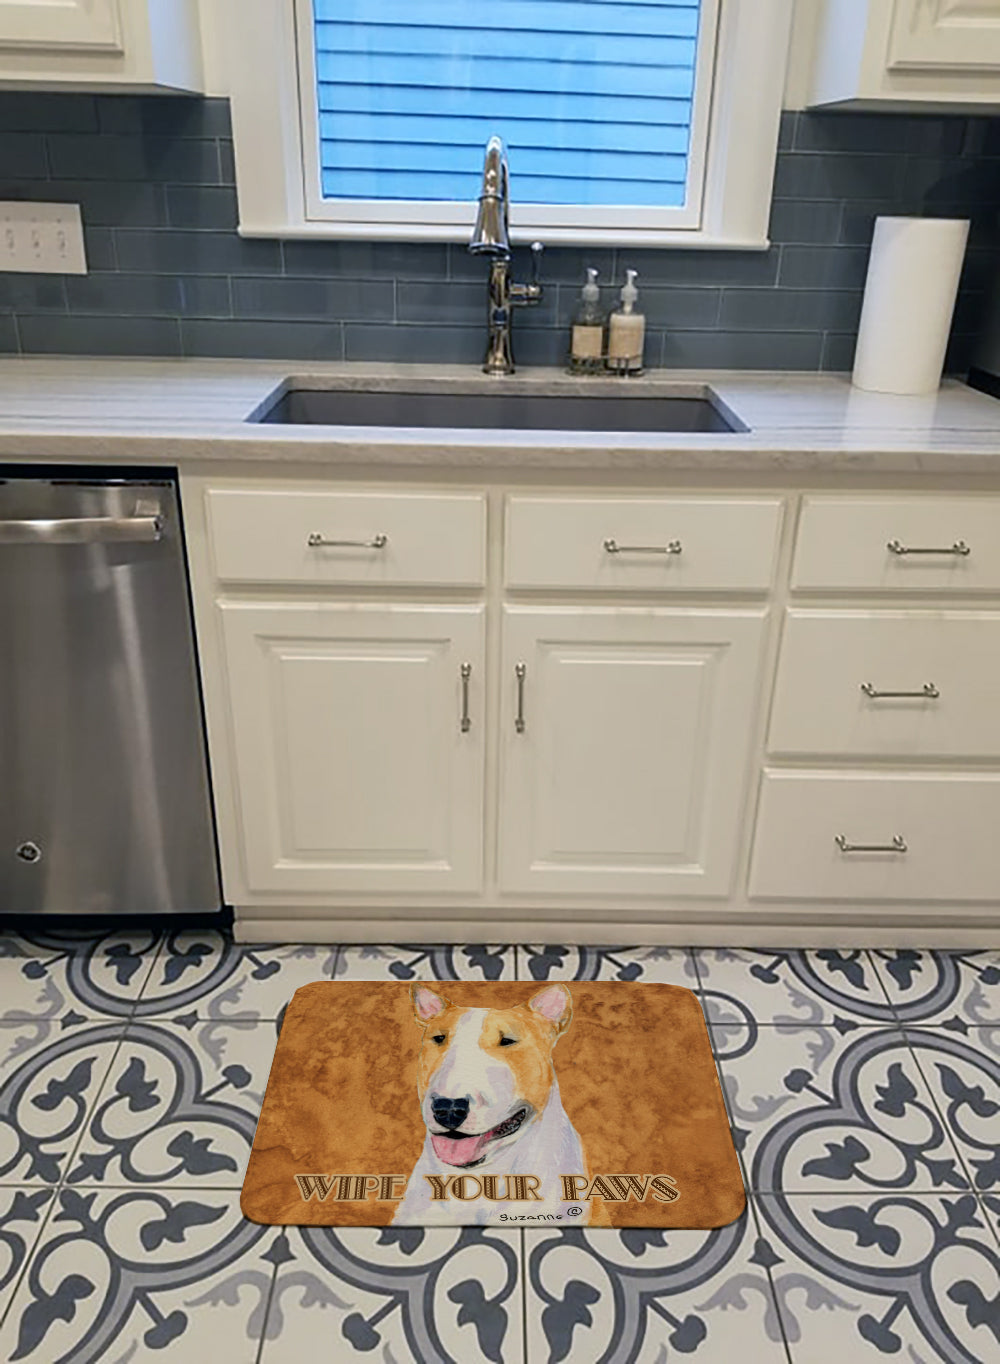 Bull Terrier Wipe your Paws Machine Washable Memory Foam Mat SS4890RUG - the-store.com